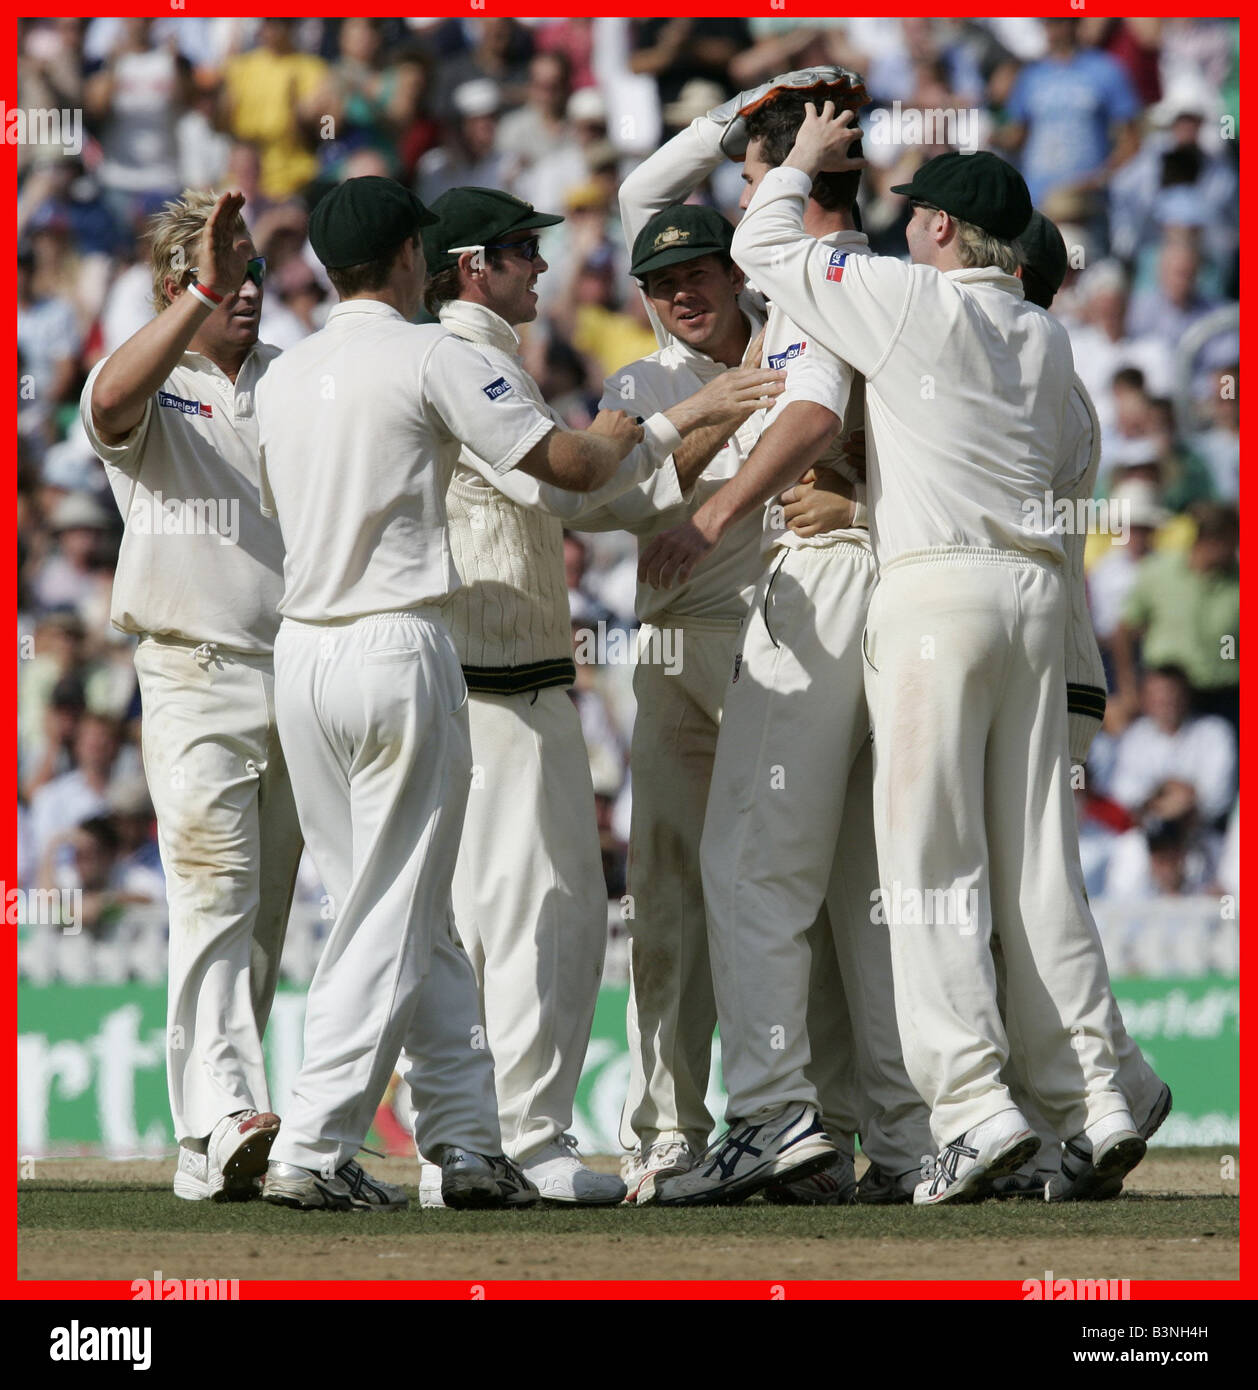 Australian cricket team celebrates wicket of Geraint Jones England V Australia 5th Ashes Test The Oval September 2005 England won the Ashes for the first time in 18 years making cricket history after securing a draw in the fifth test to win at the Oval Stock Photo